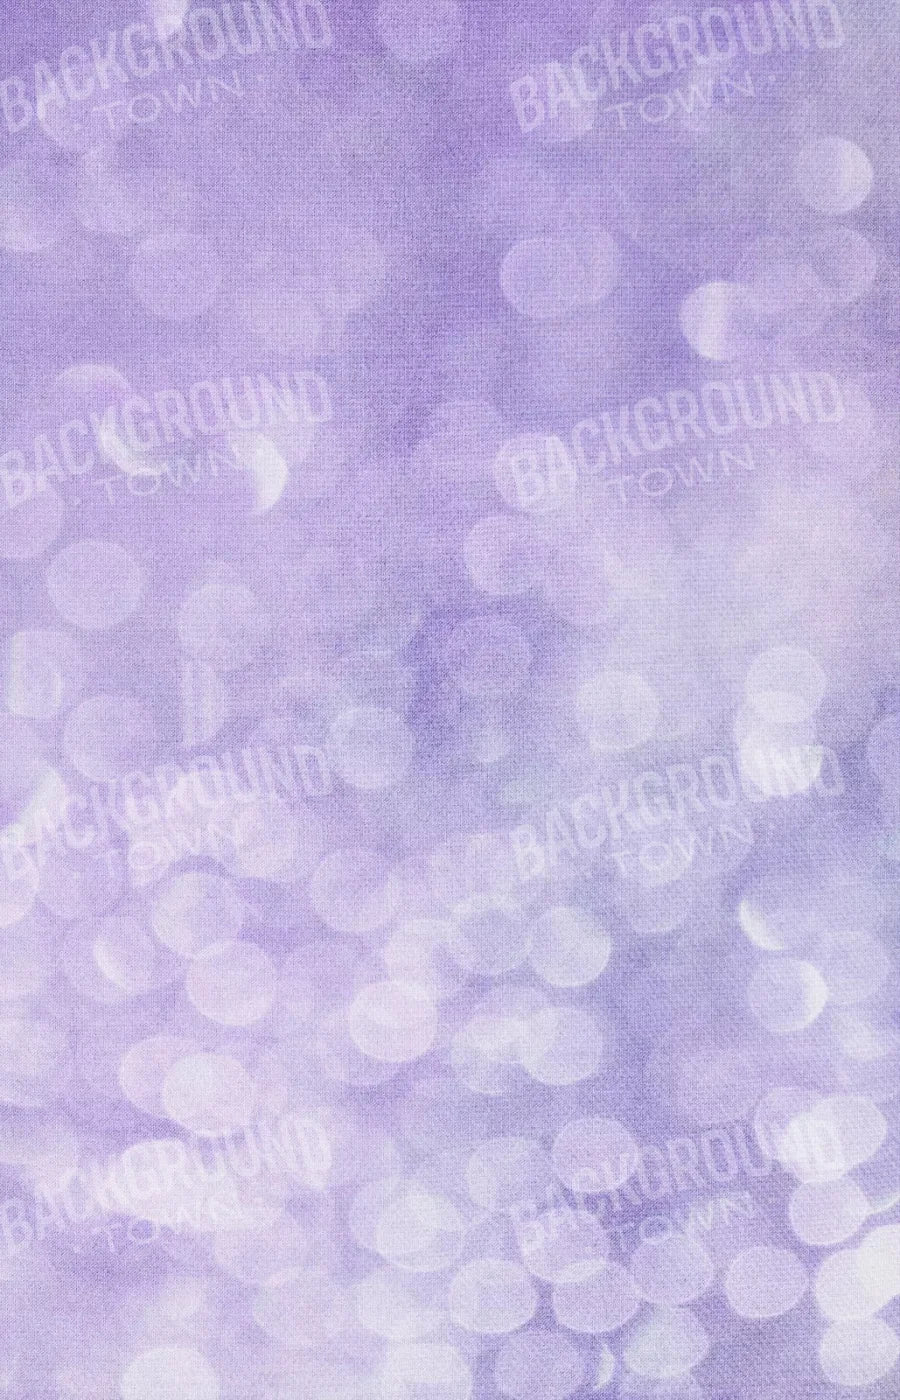 Majestic Violet 8X12 Ultracloth ( 96 X 144 Inch ) Backdrop